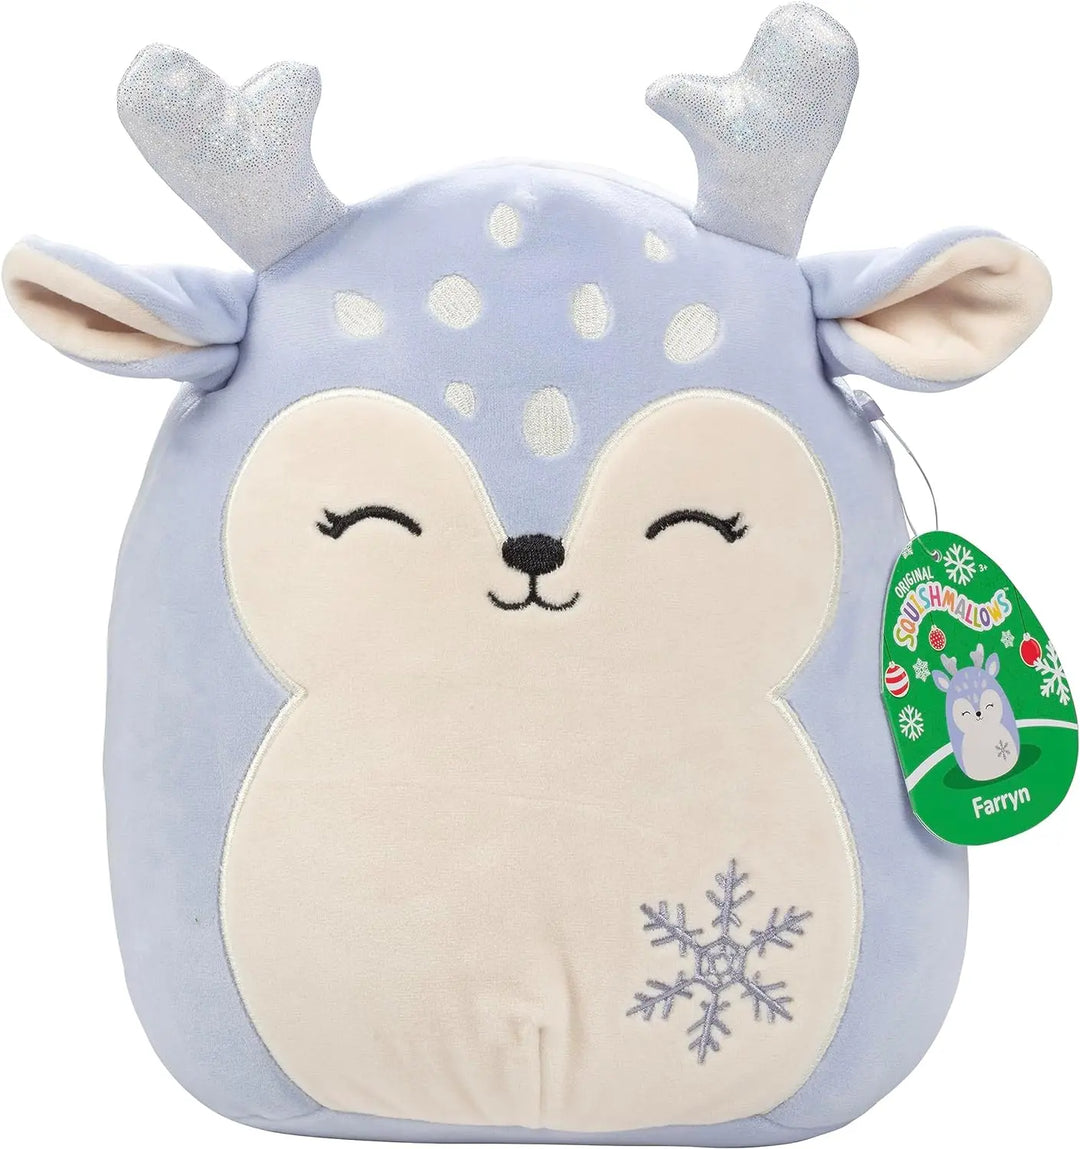  Squishmallows 8 Stitch Christmas Plush - Official Kellytoy -  Collectible Soft & Squishy Holiday Disney Stuffed Animal Toy - Add to Your  Squad - Gift for Kids, Girls & Boys 